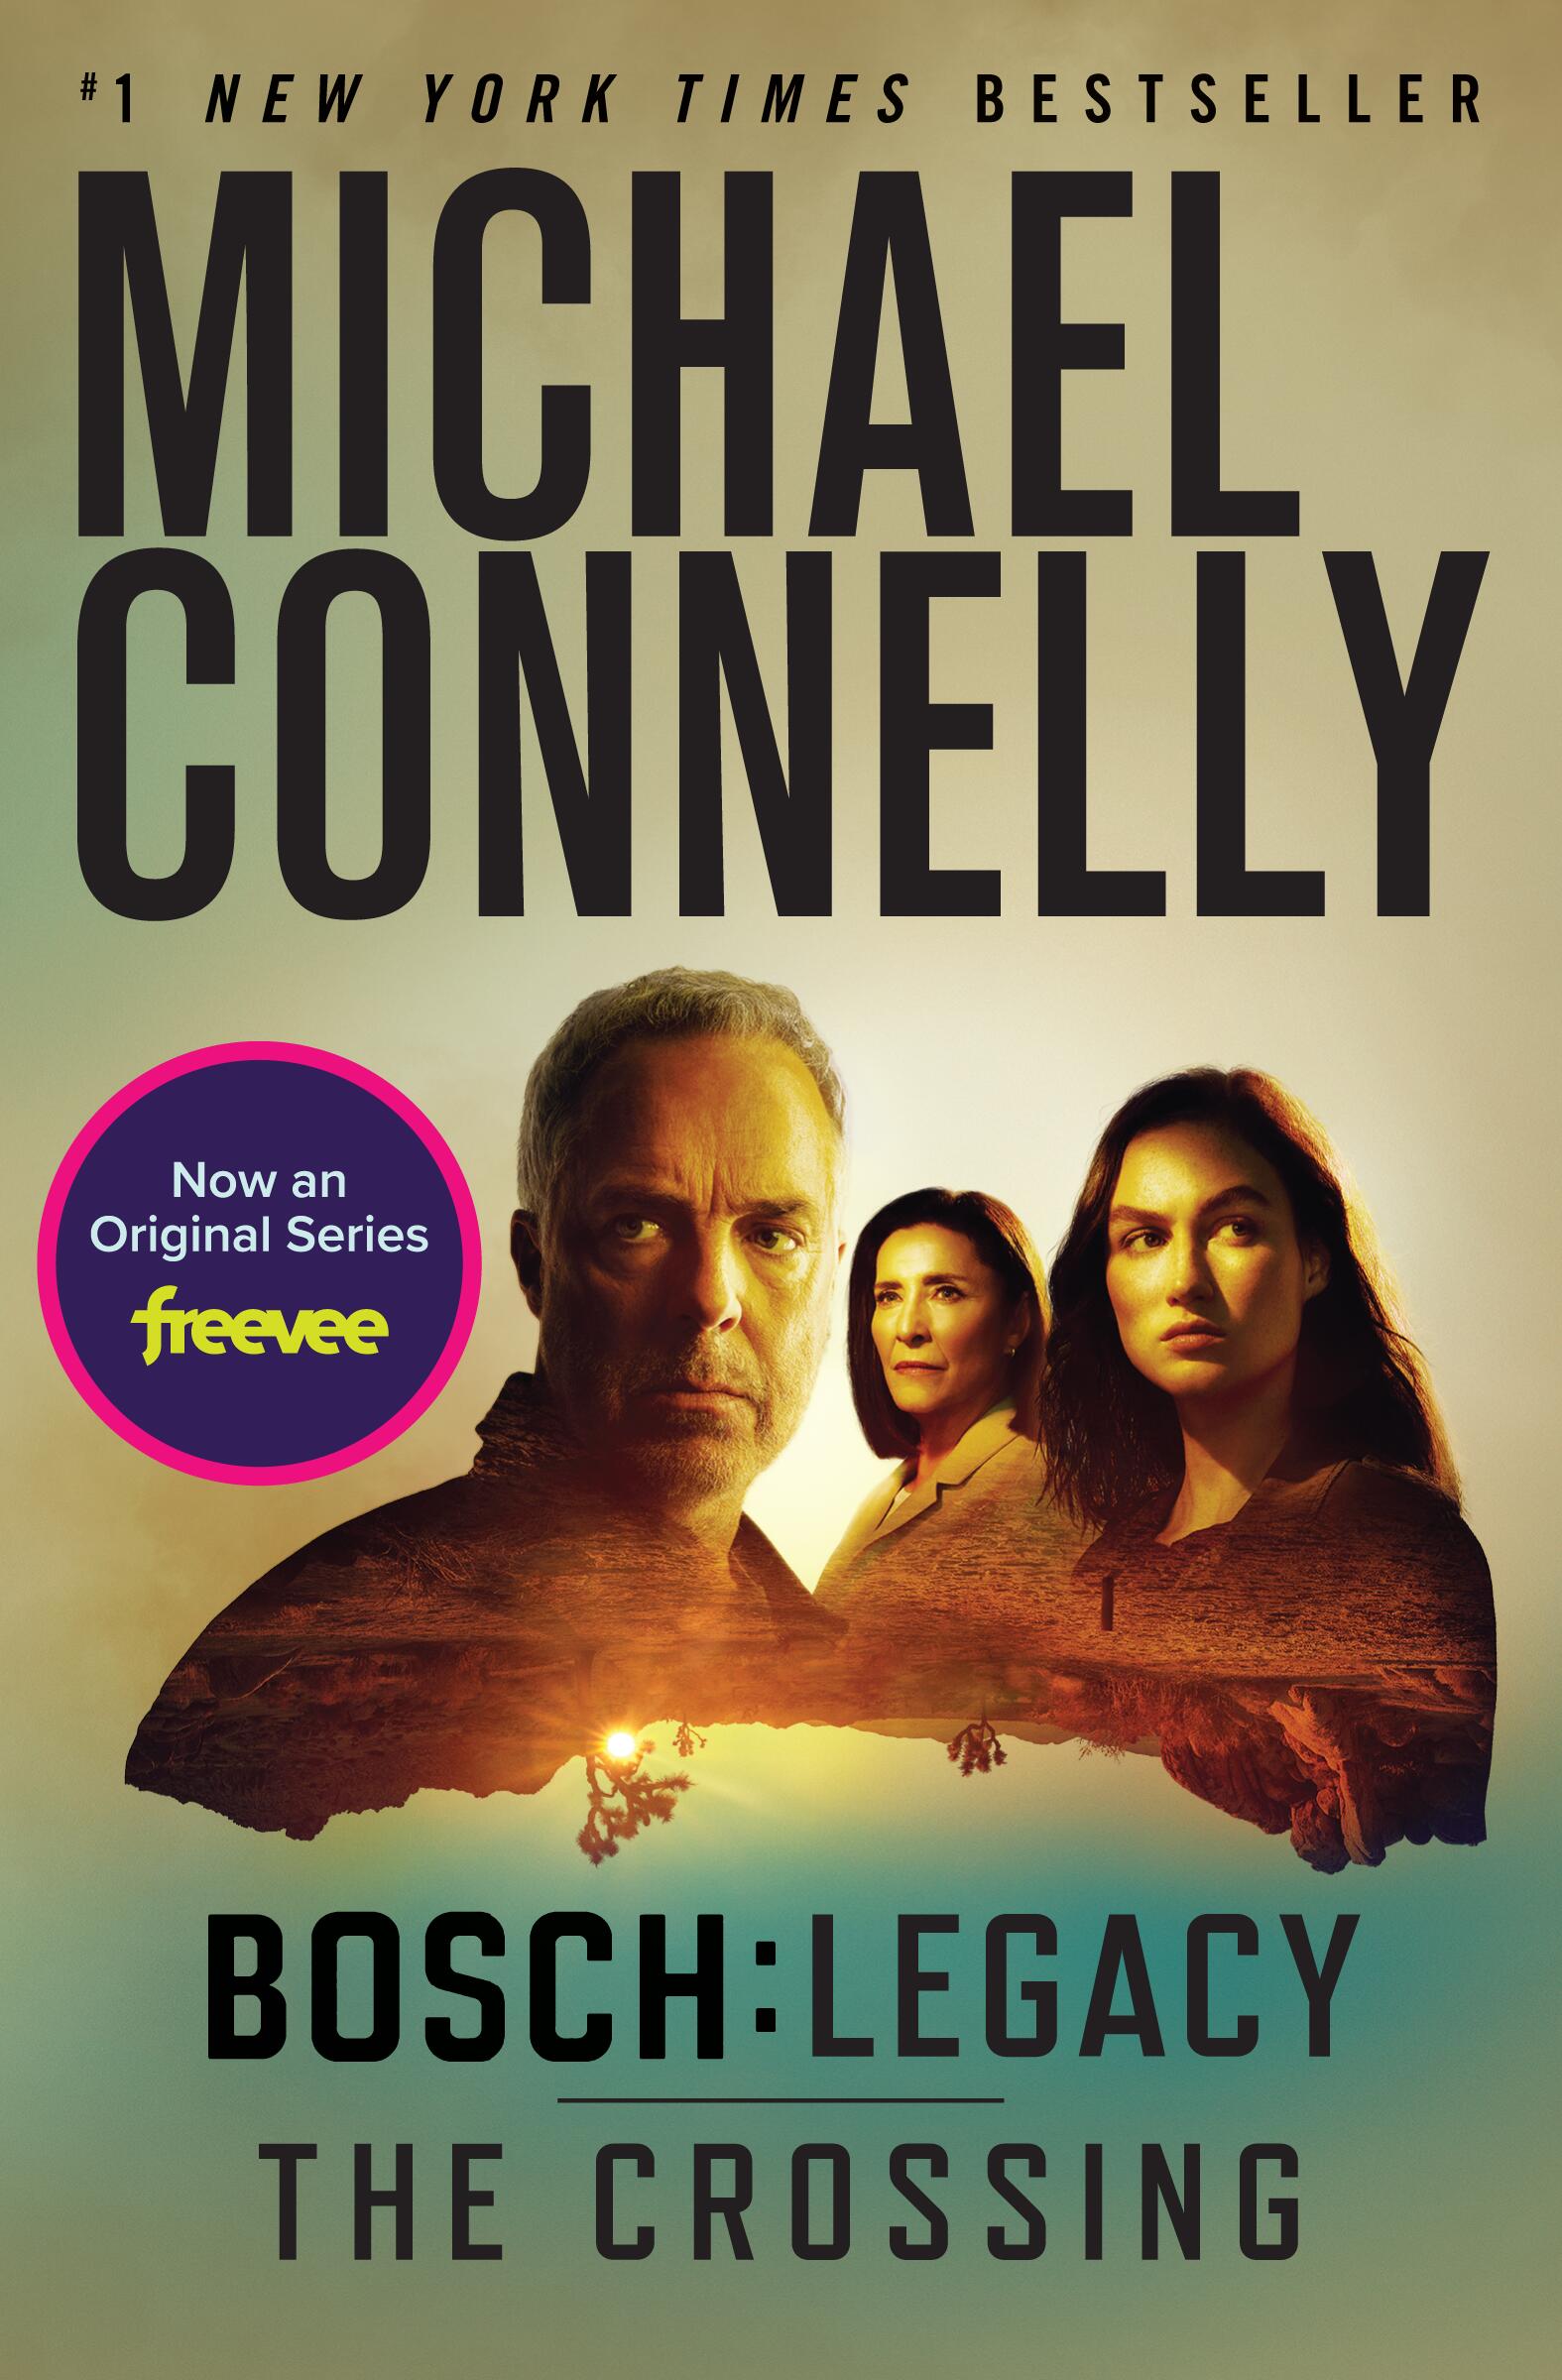 The Crossing by Michael Connelly